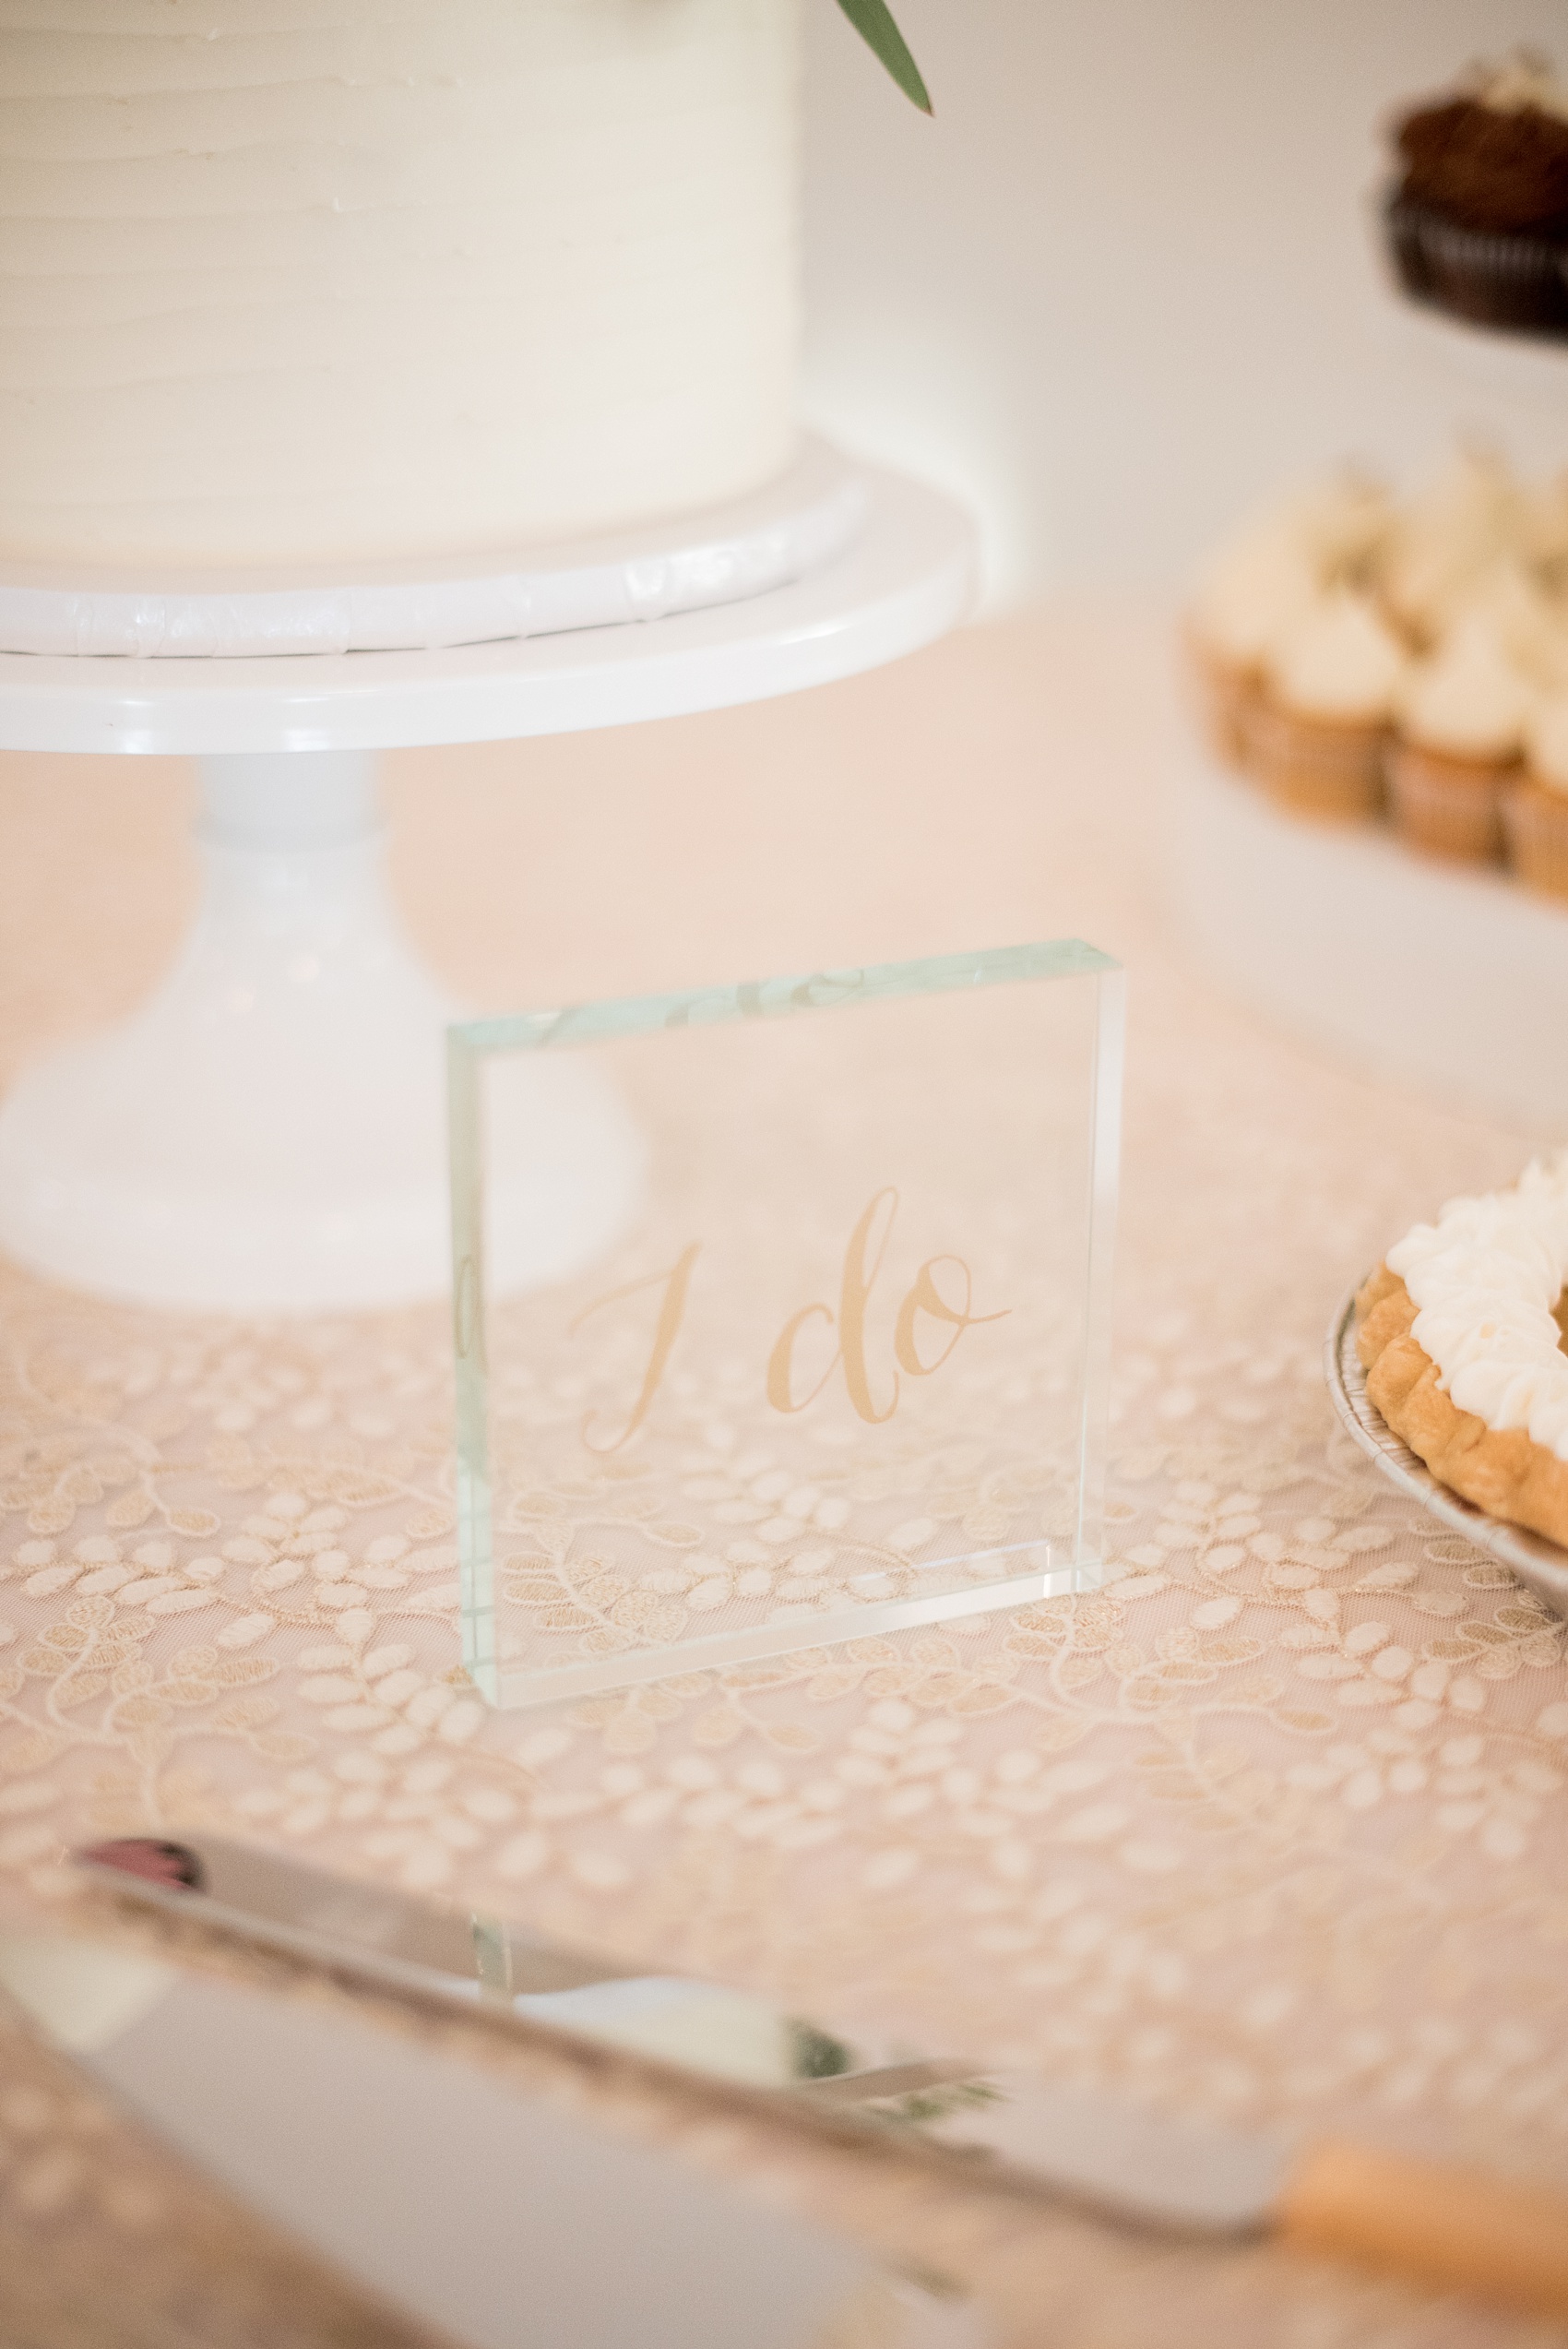 Mikkel Paige Photography photos from a Merrimon-Wynne House wedding in Raleigh. "I do" glass dessert table signage.